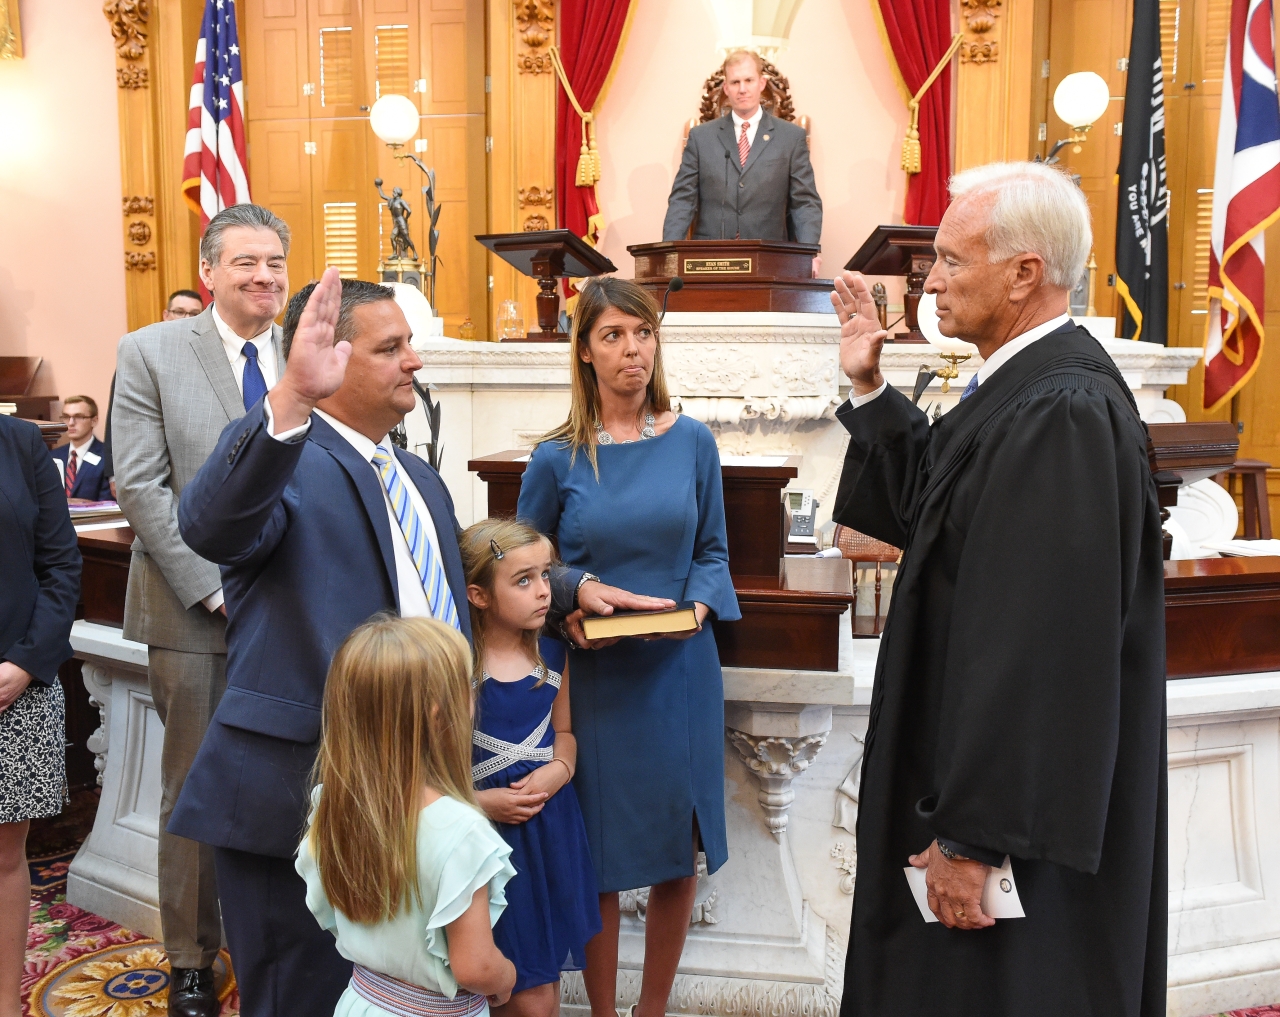 Shane Wilkin Sworn In as State Representative of the 91st Ohio House District